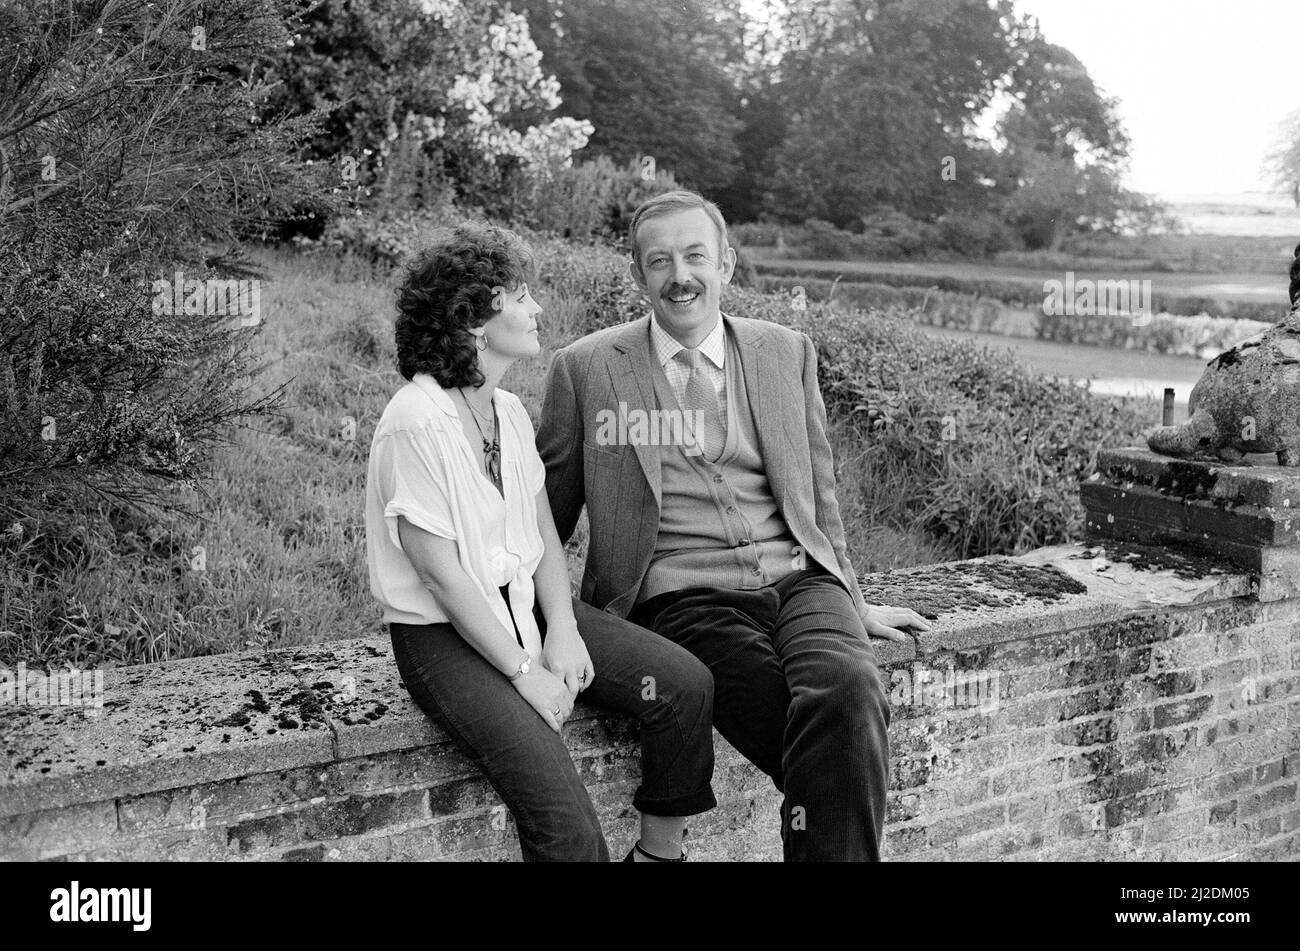 Pauline Collins and Roy Marsden on the set of 'The Black Tower' in Norfolk. 25th July 1985. Stock Photo